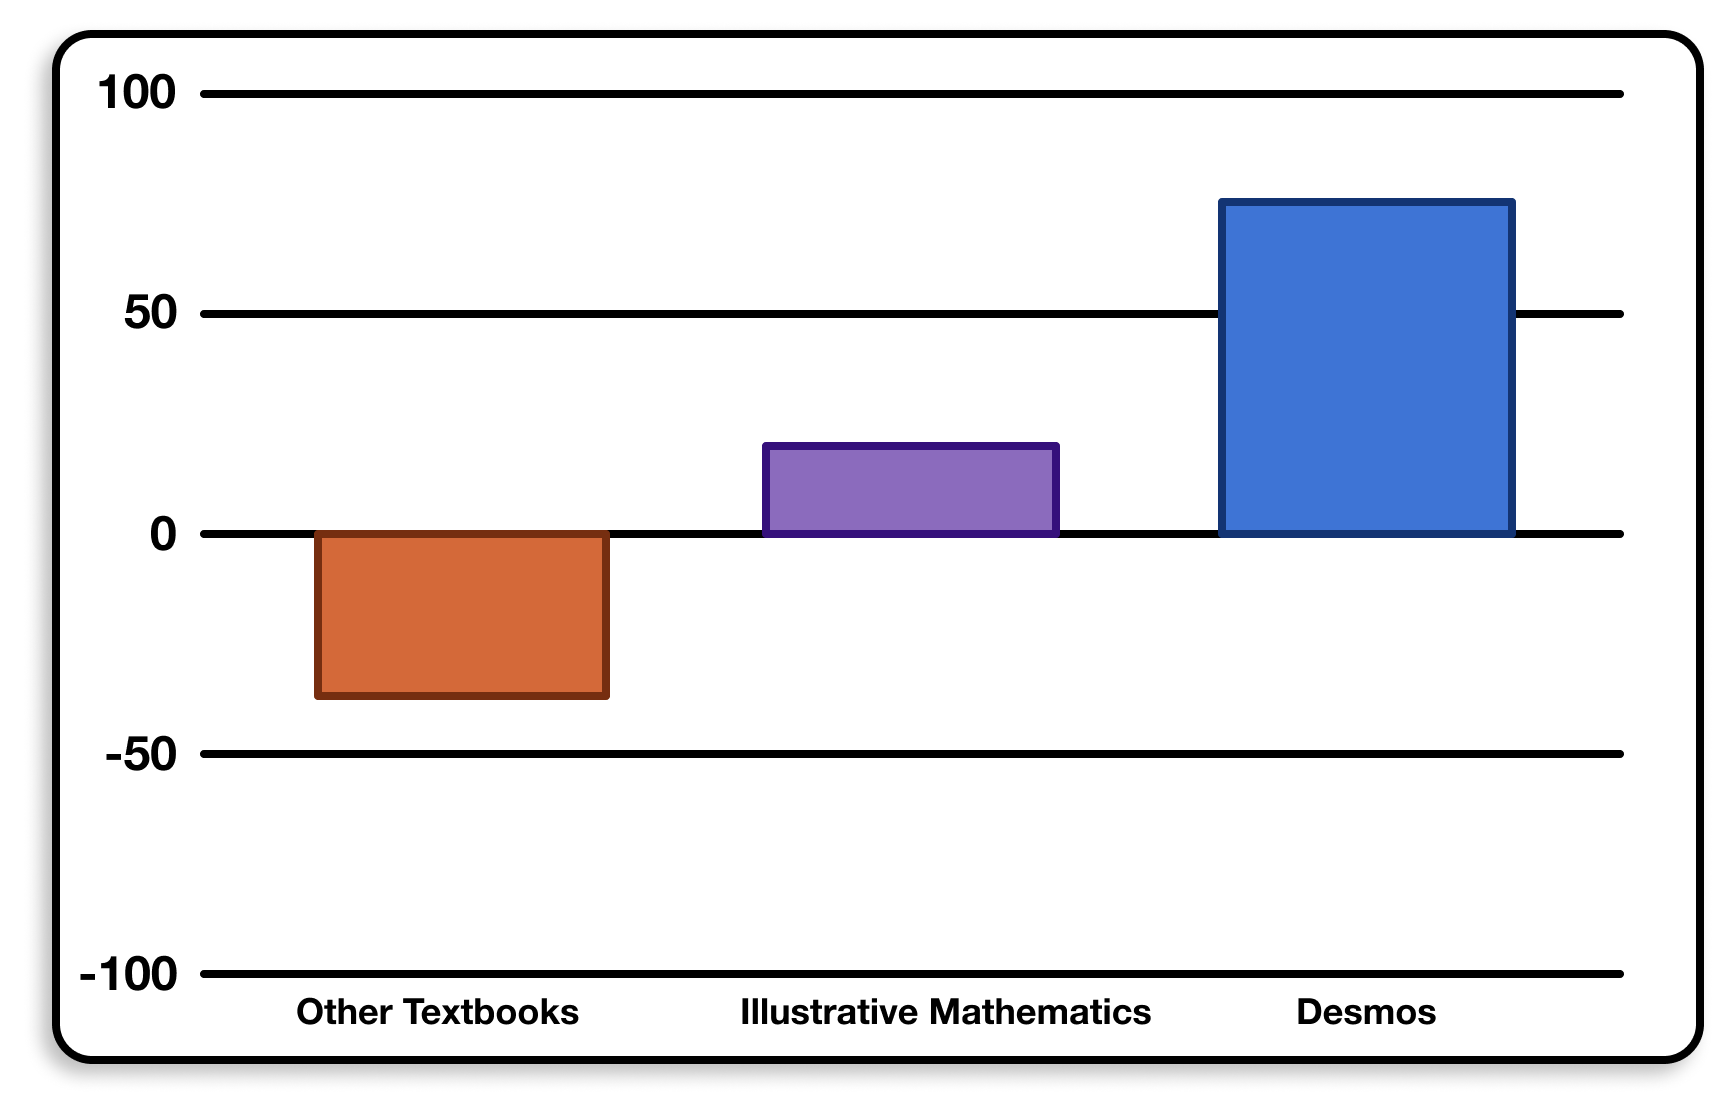 Desmos outscoring all other curriculum for Net Promoter Score.